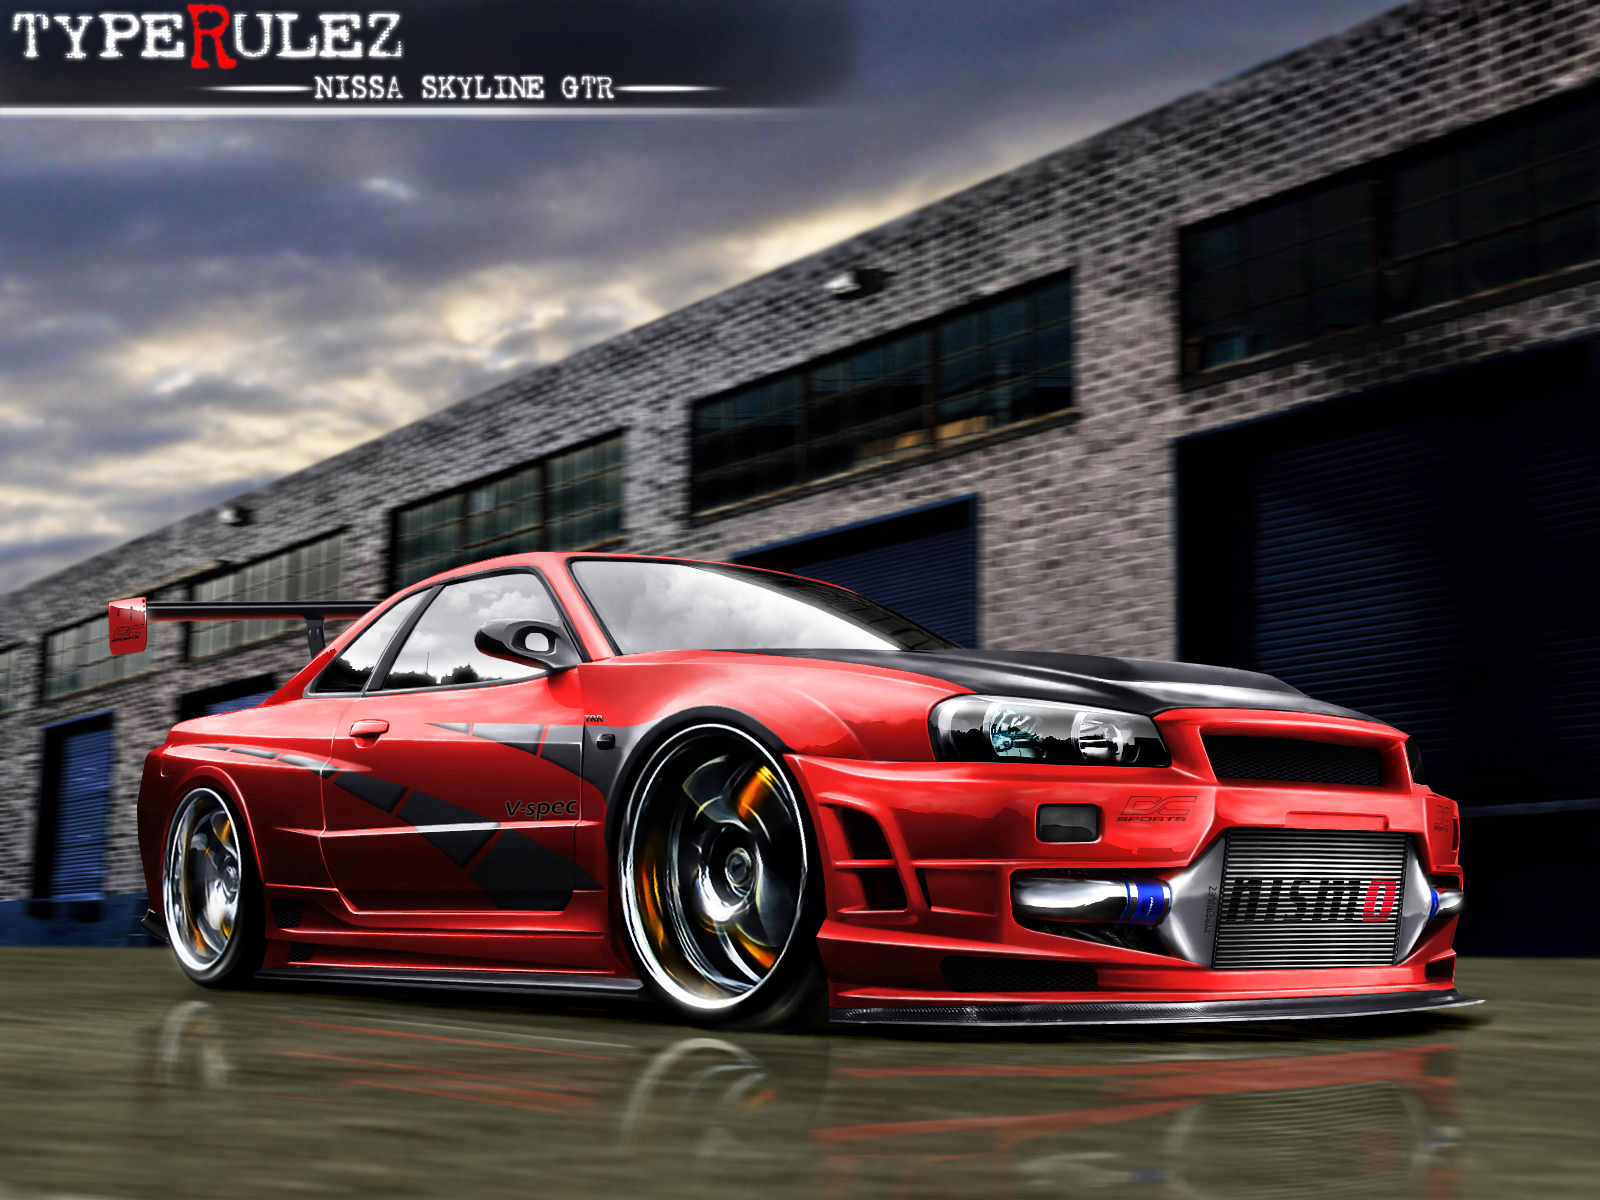 Free Download Free Exotic Car Wallpapers Nissan Skyline Gt R By Typerulez